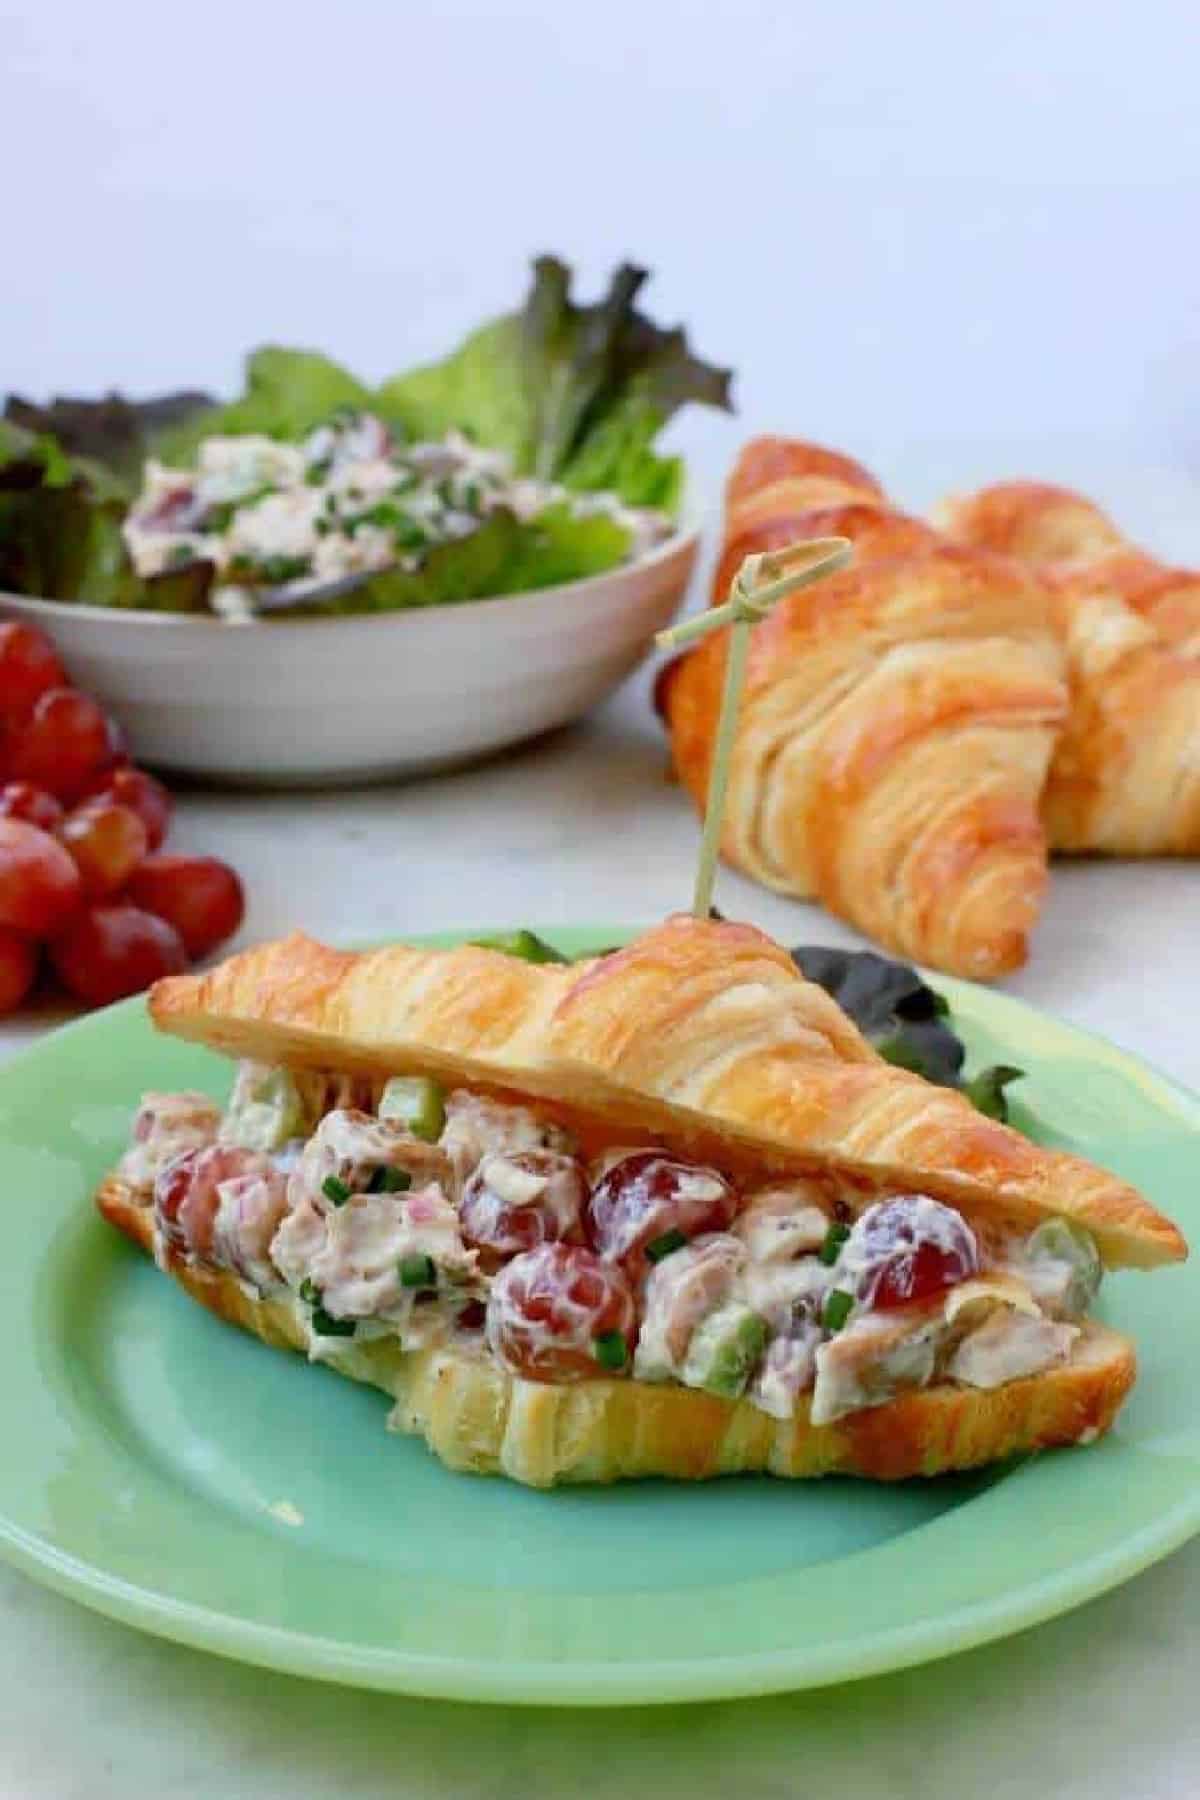 A green plate containing a croissant filled with chicken salad.